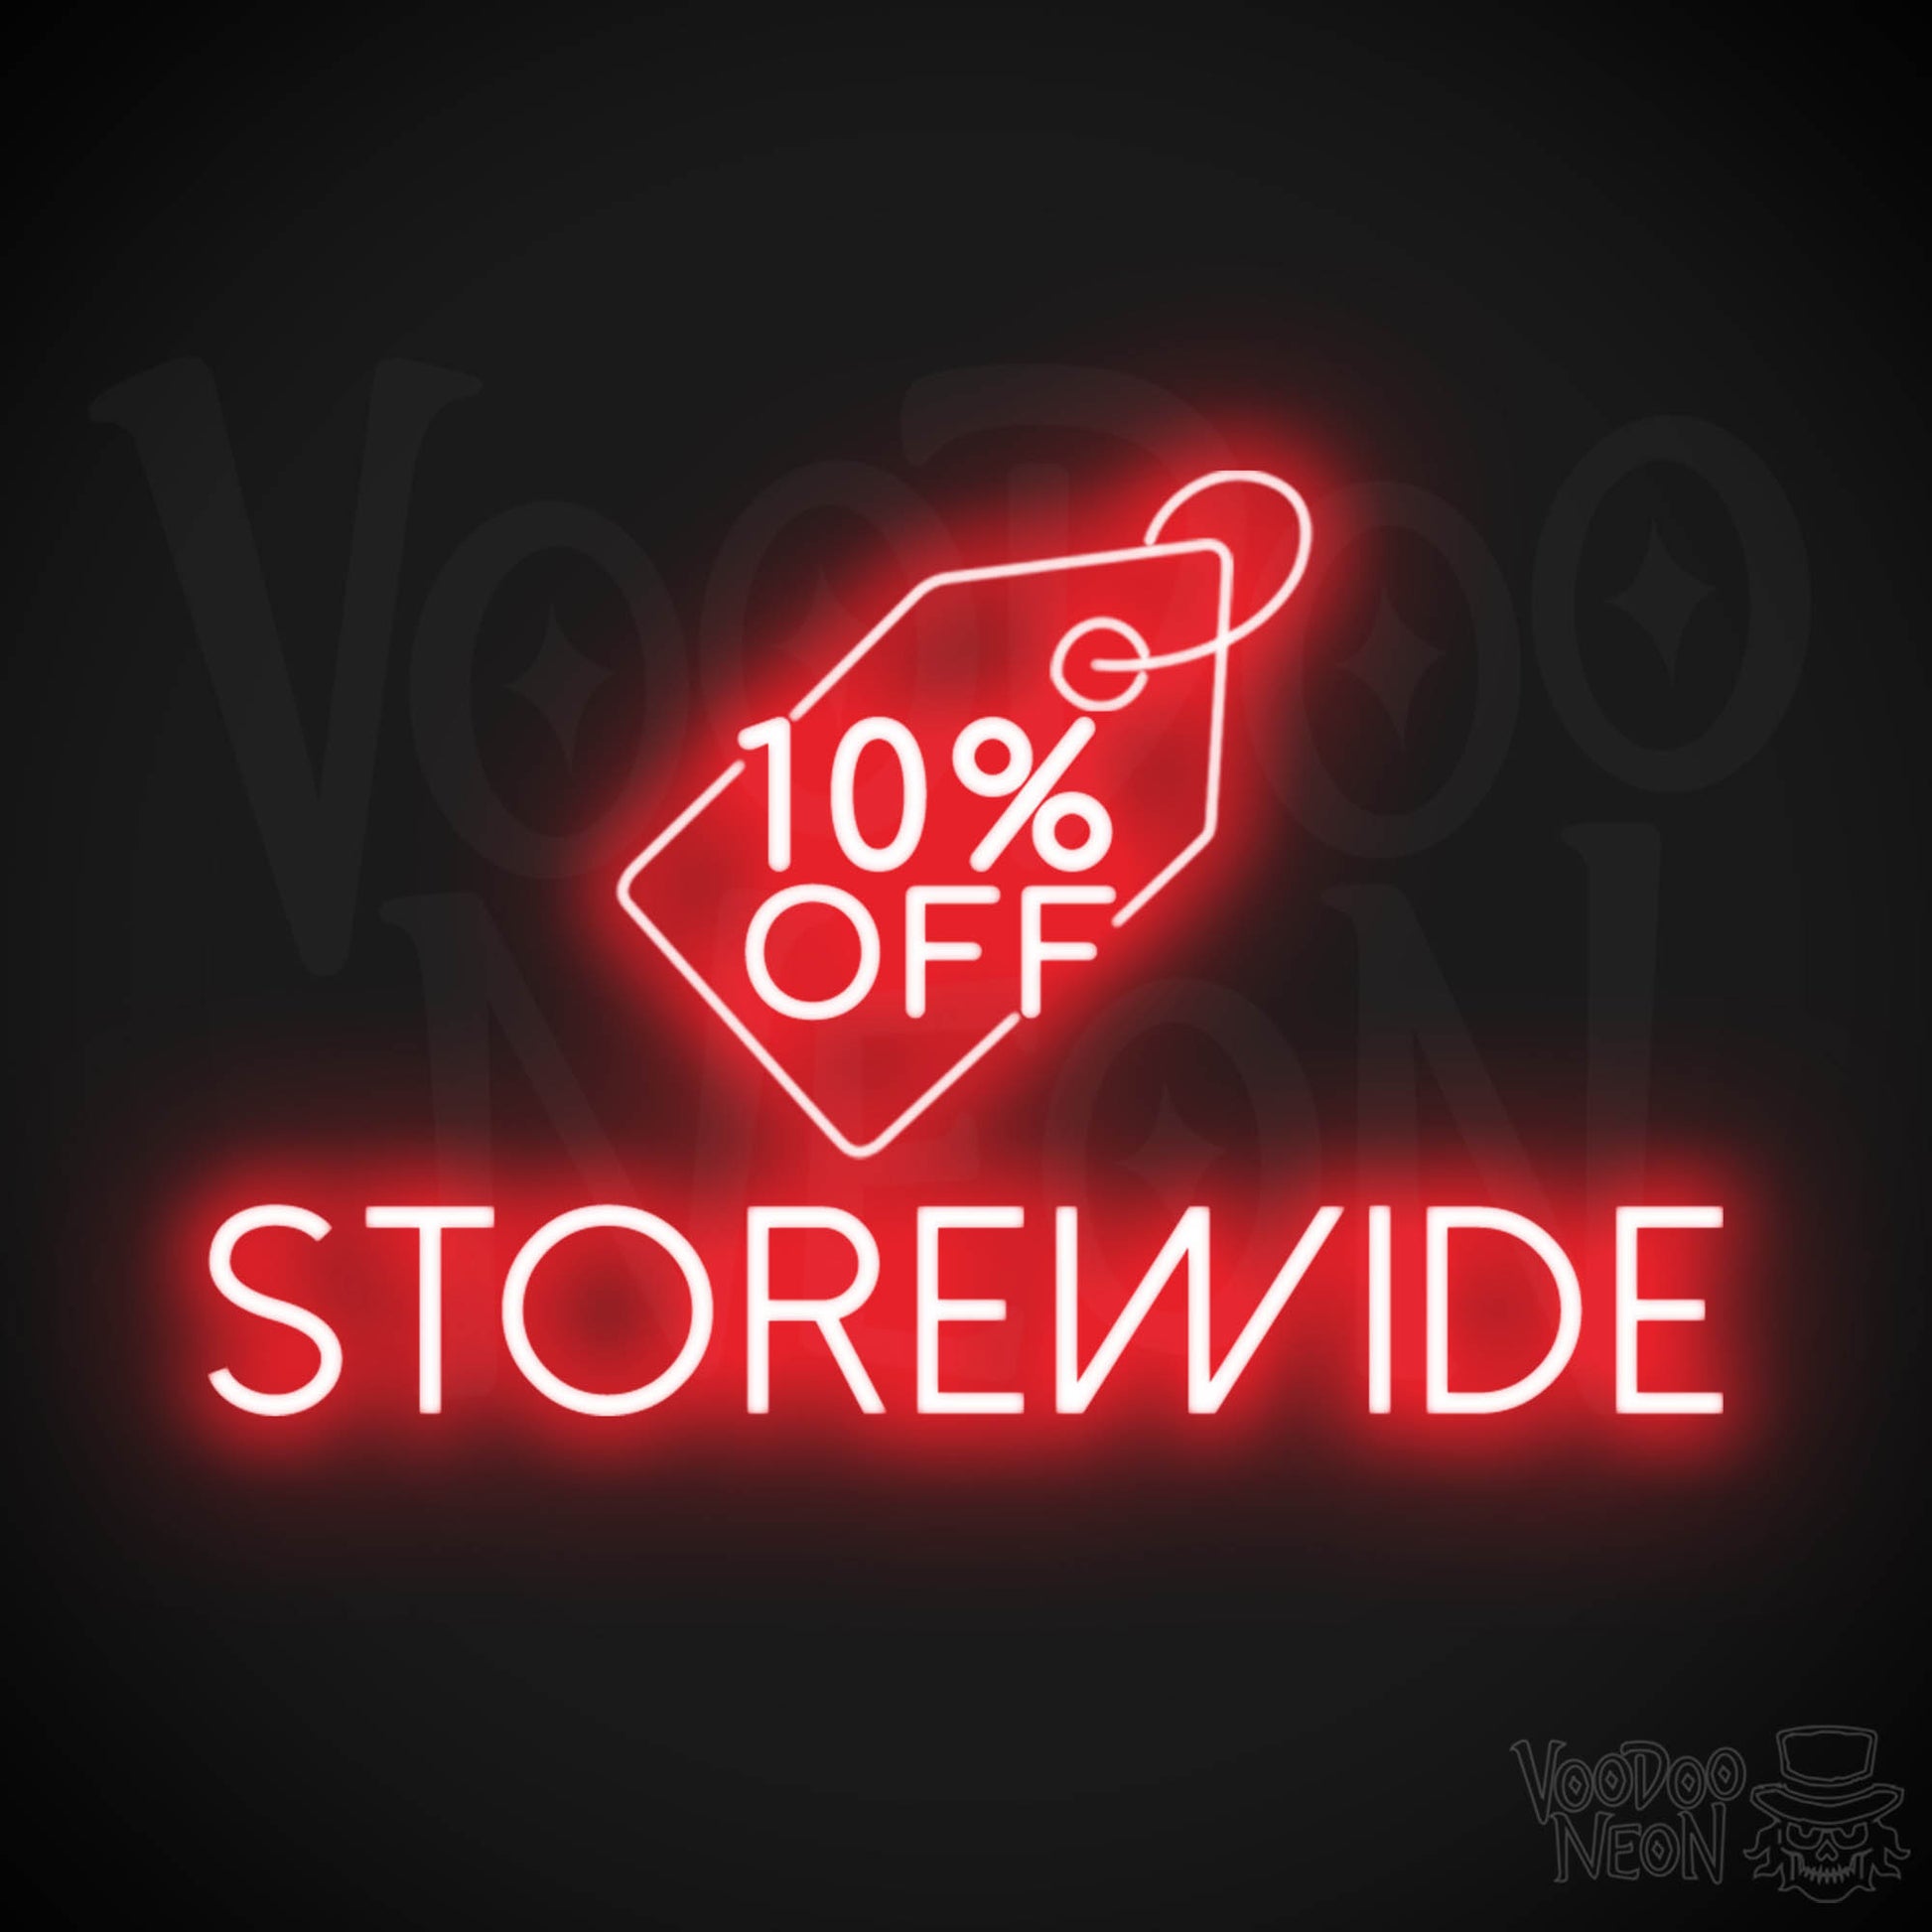 10% Off Storewide Neon Sign - 10% Off Storewide Sign - Neon Shop Signs - Color Red